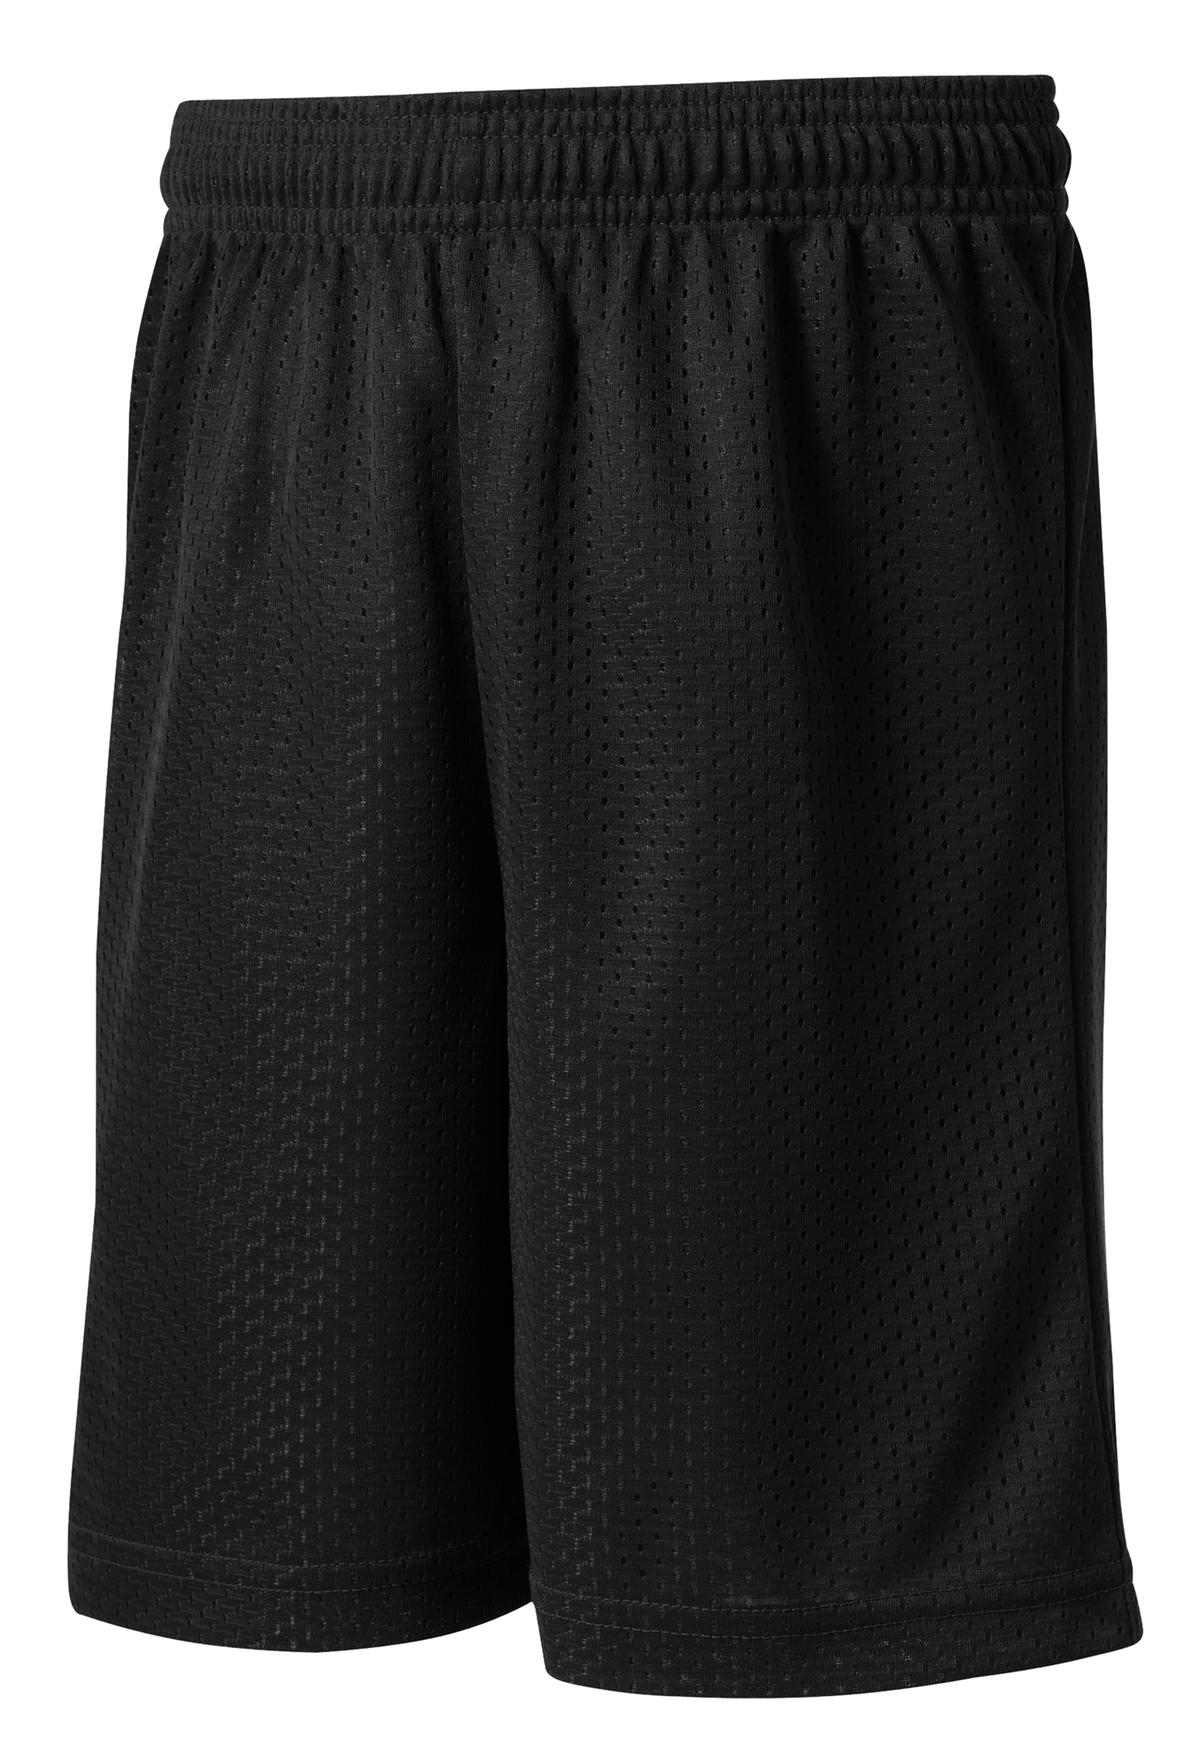 Sport-tek ® Youth Posicharge ® Classic Mesh Short Questions & Answers